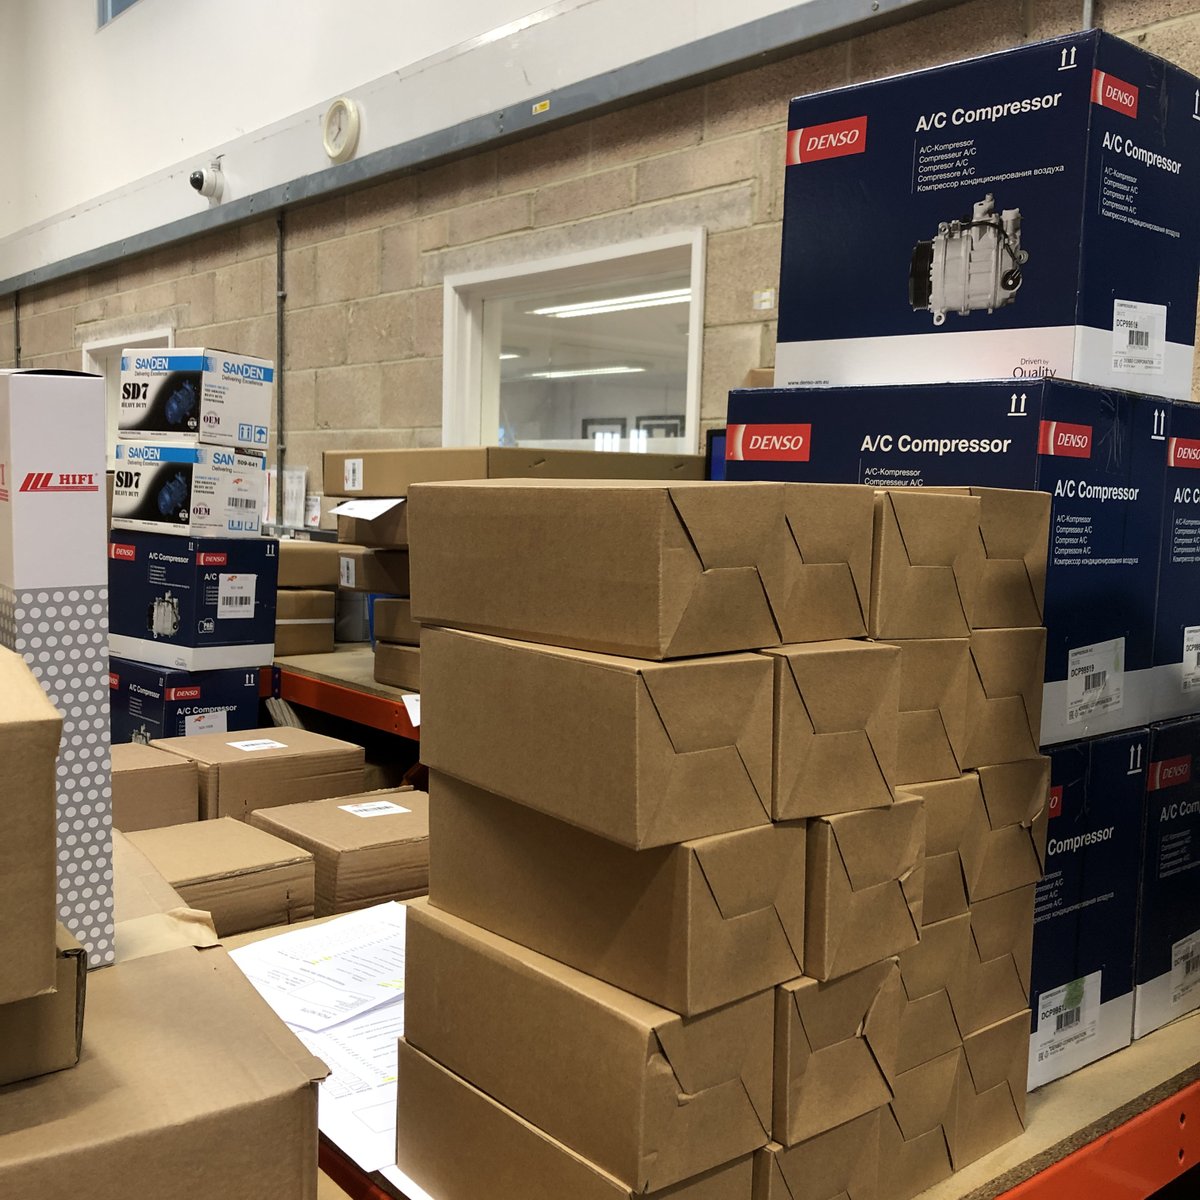 👀How many brands can you spot?
🏆Find even more of the best names in 🚜🚧#mobileaircon parts & supplies at apairltd.com
🛒Next day delivery to UK & Ireland (ts & cs apply)
#denso #sanden #hififilters #agriculturalmachinery #constructionmachinery #planthire #airconpart